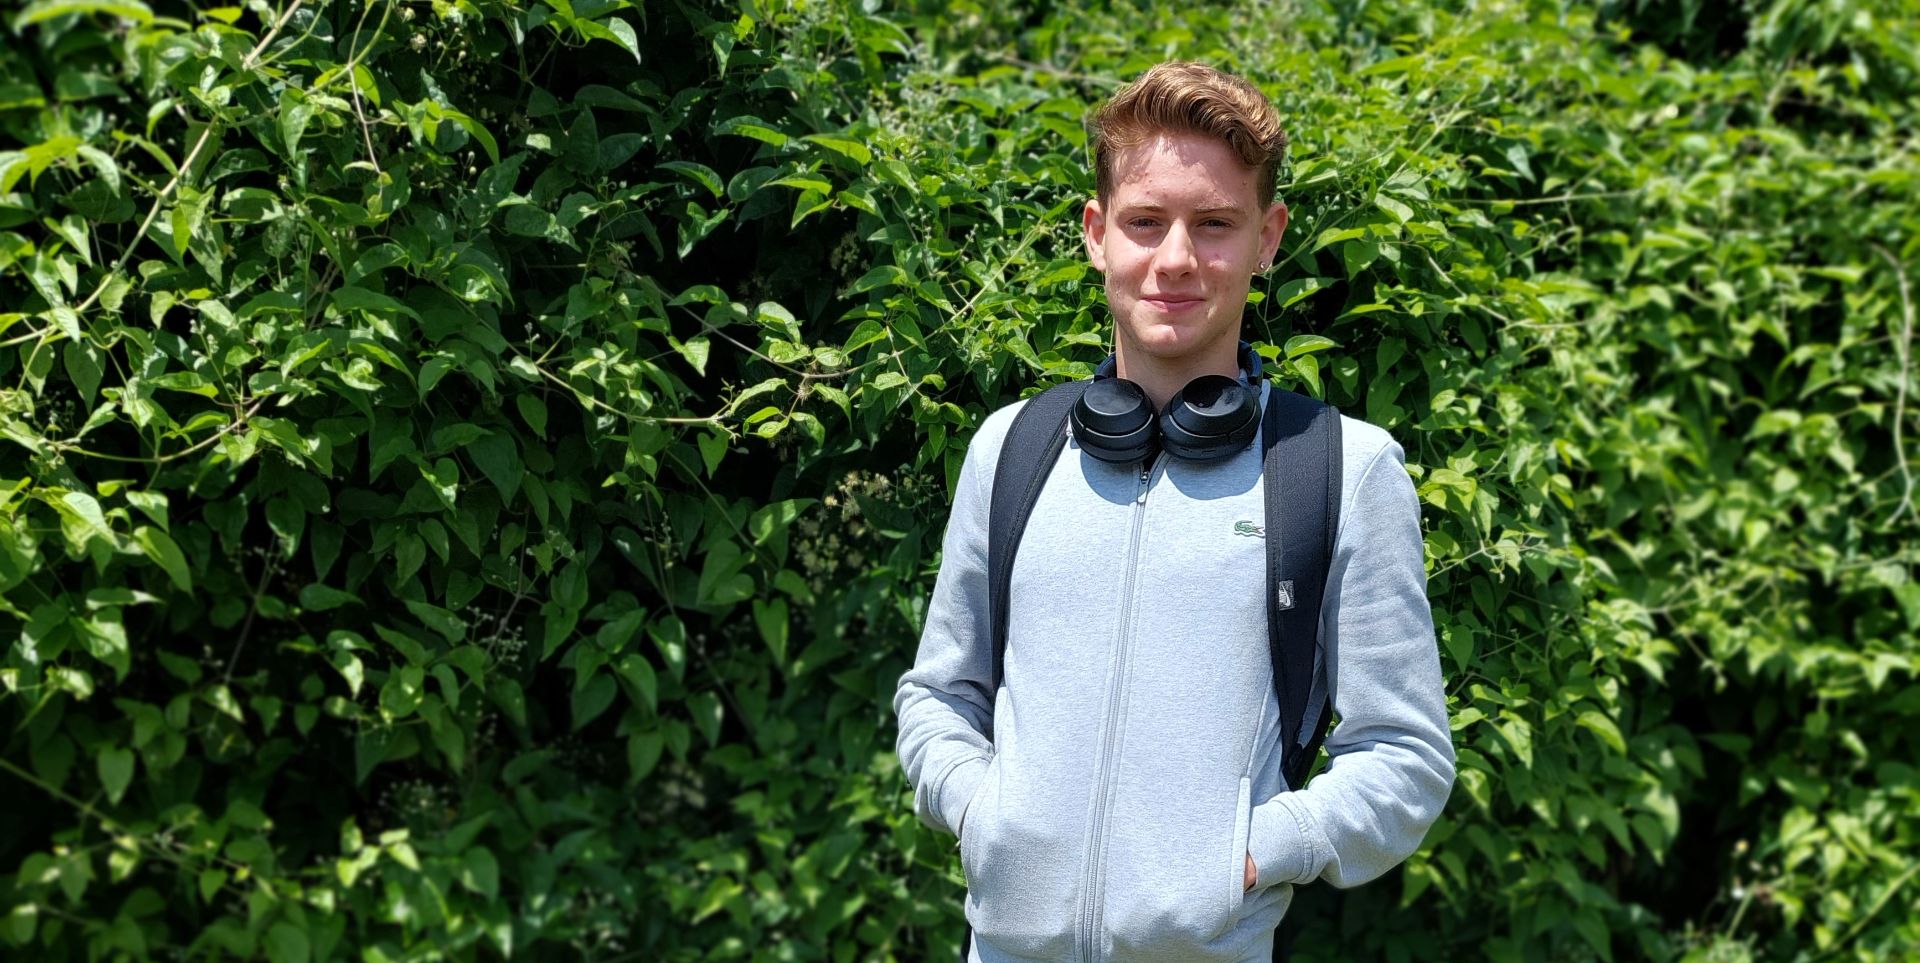 BHASVIC student Benji pictured, attended Growing Greener Sussex whilst on work experience with the BHASVIC Marketing & Communications department